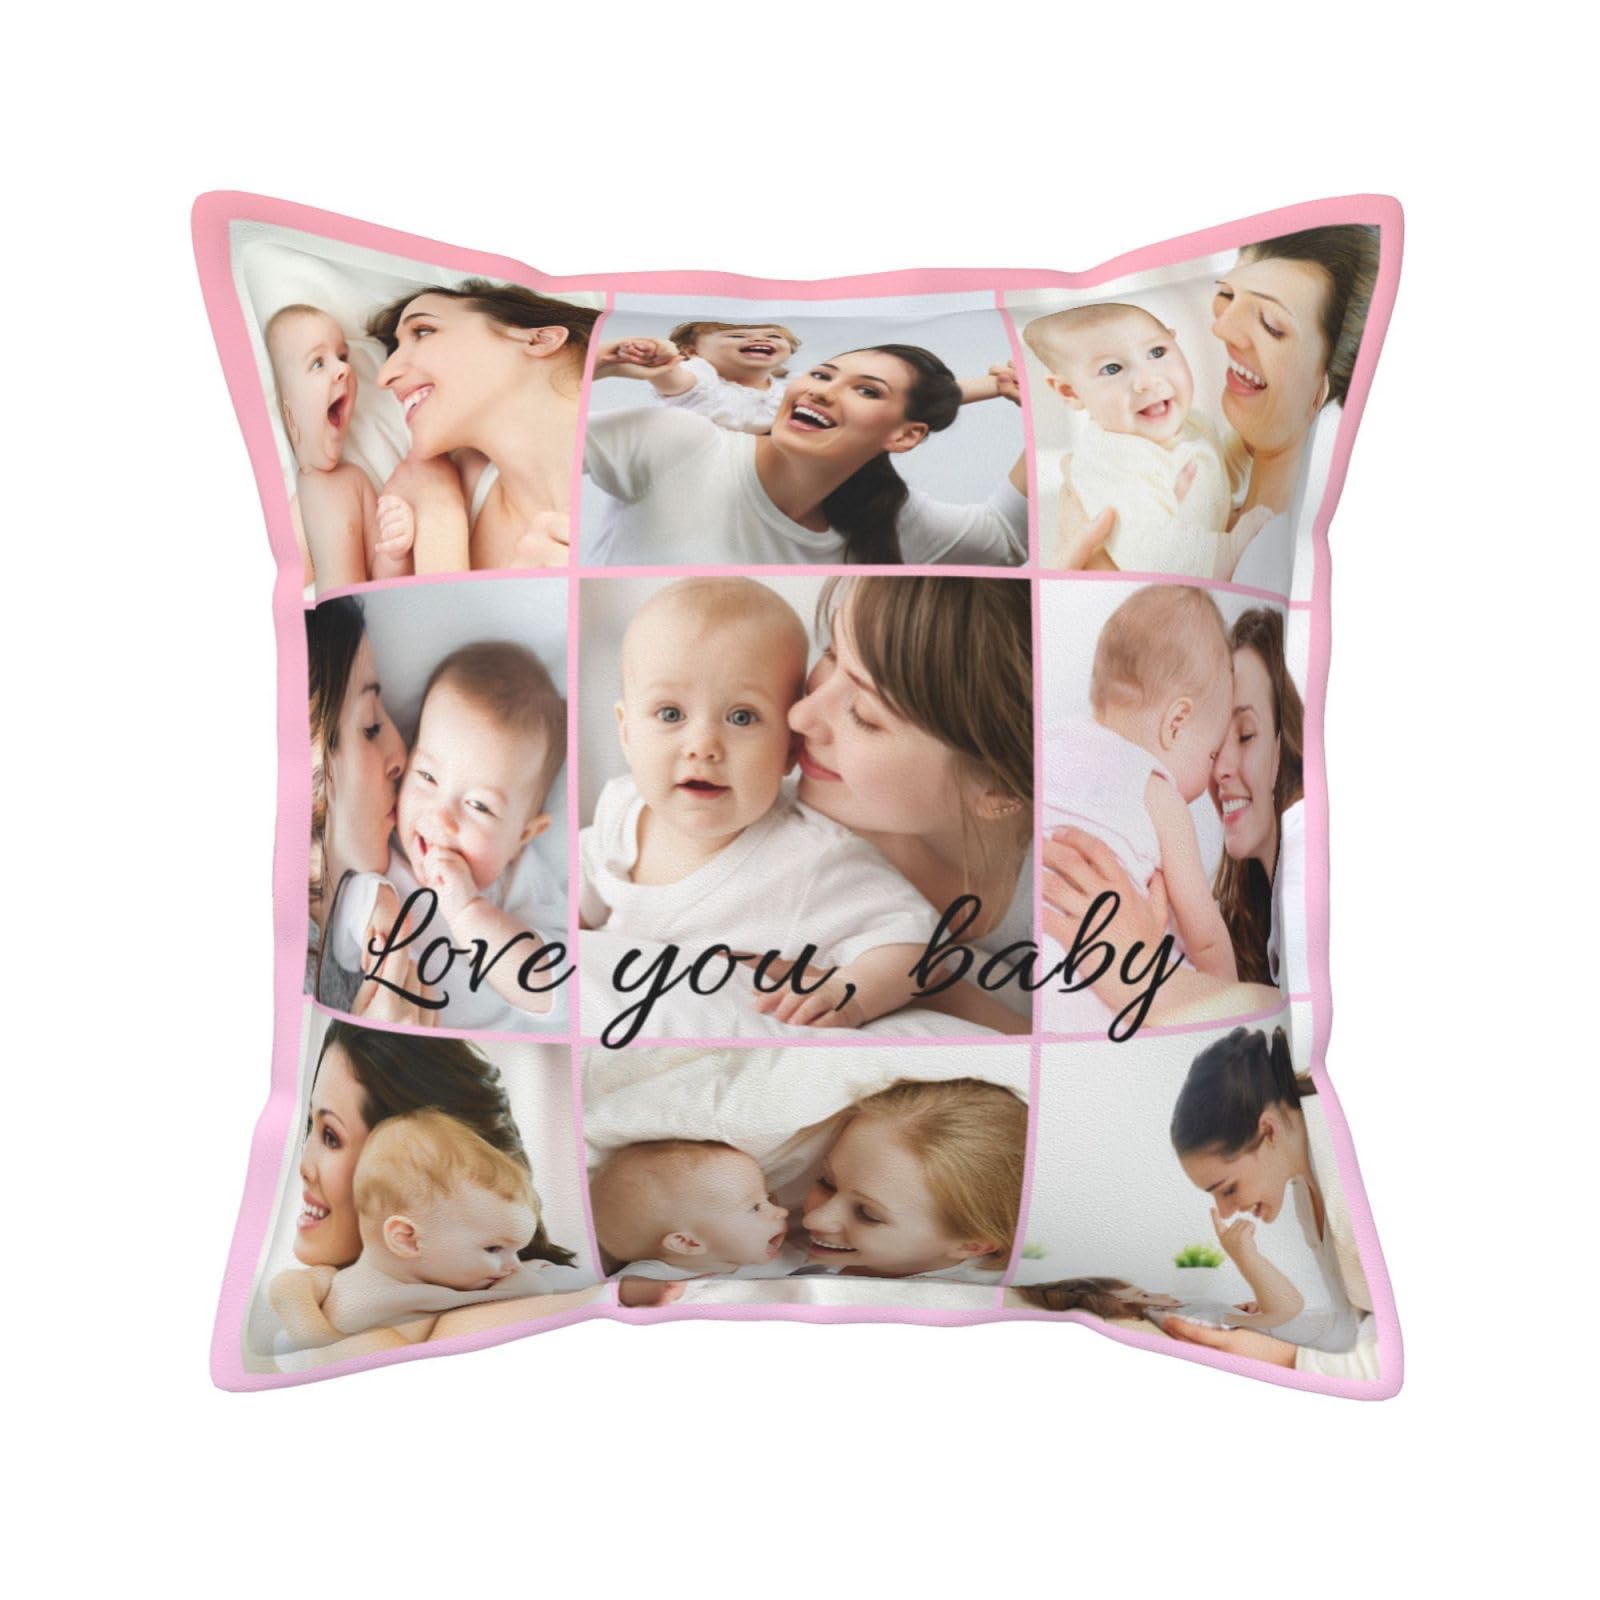 ARDDIS Custom Pillow case Personalized Pillowcase Double Side Print Customized Pillow Cover with Pictures,Photo,Text Decorative Pillows